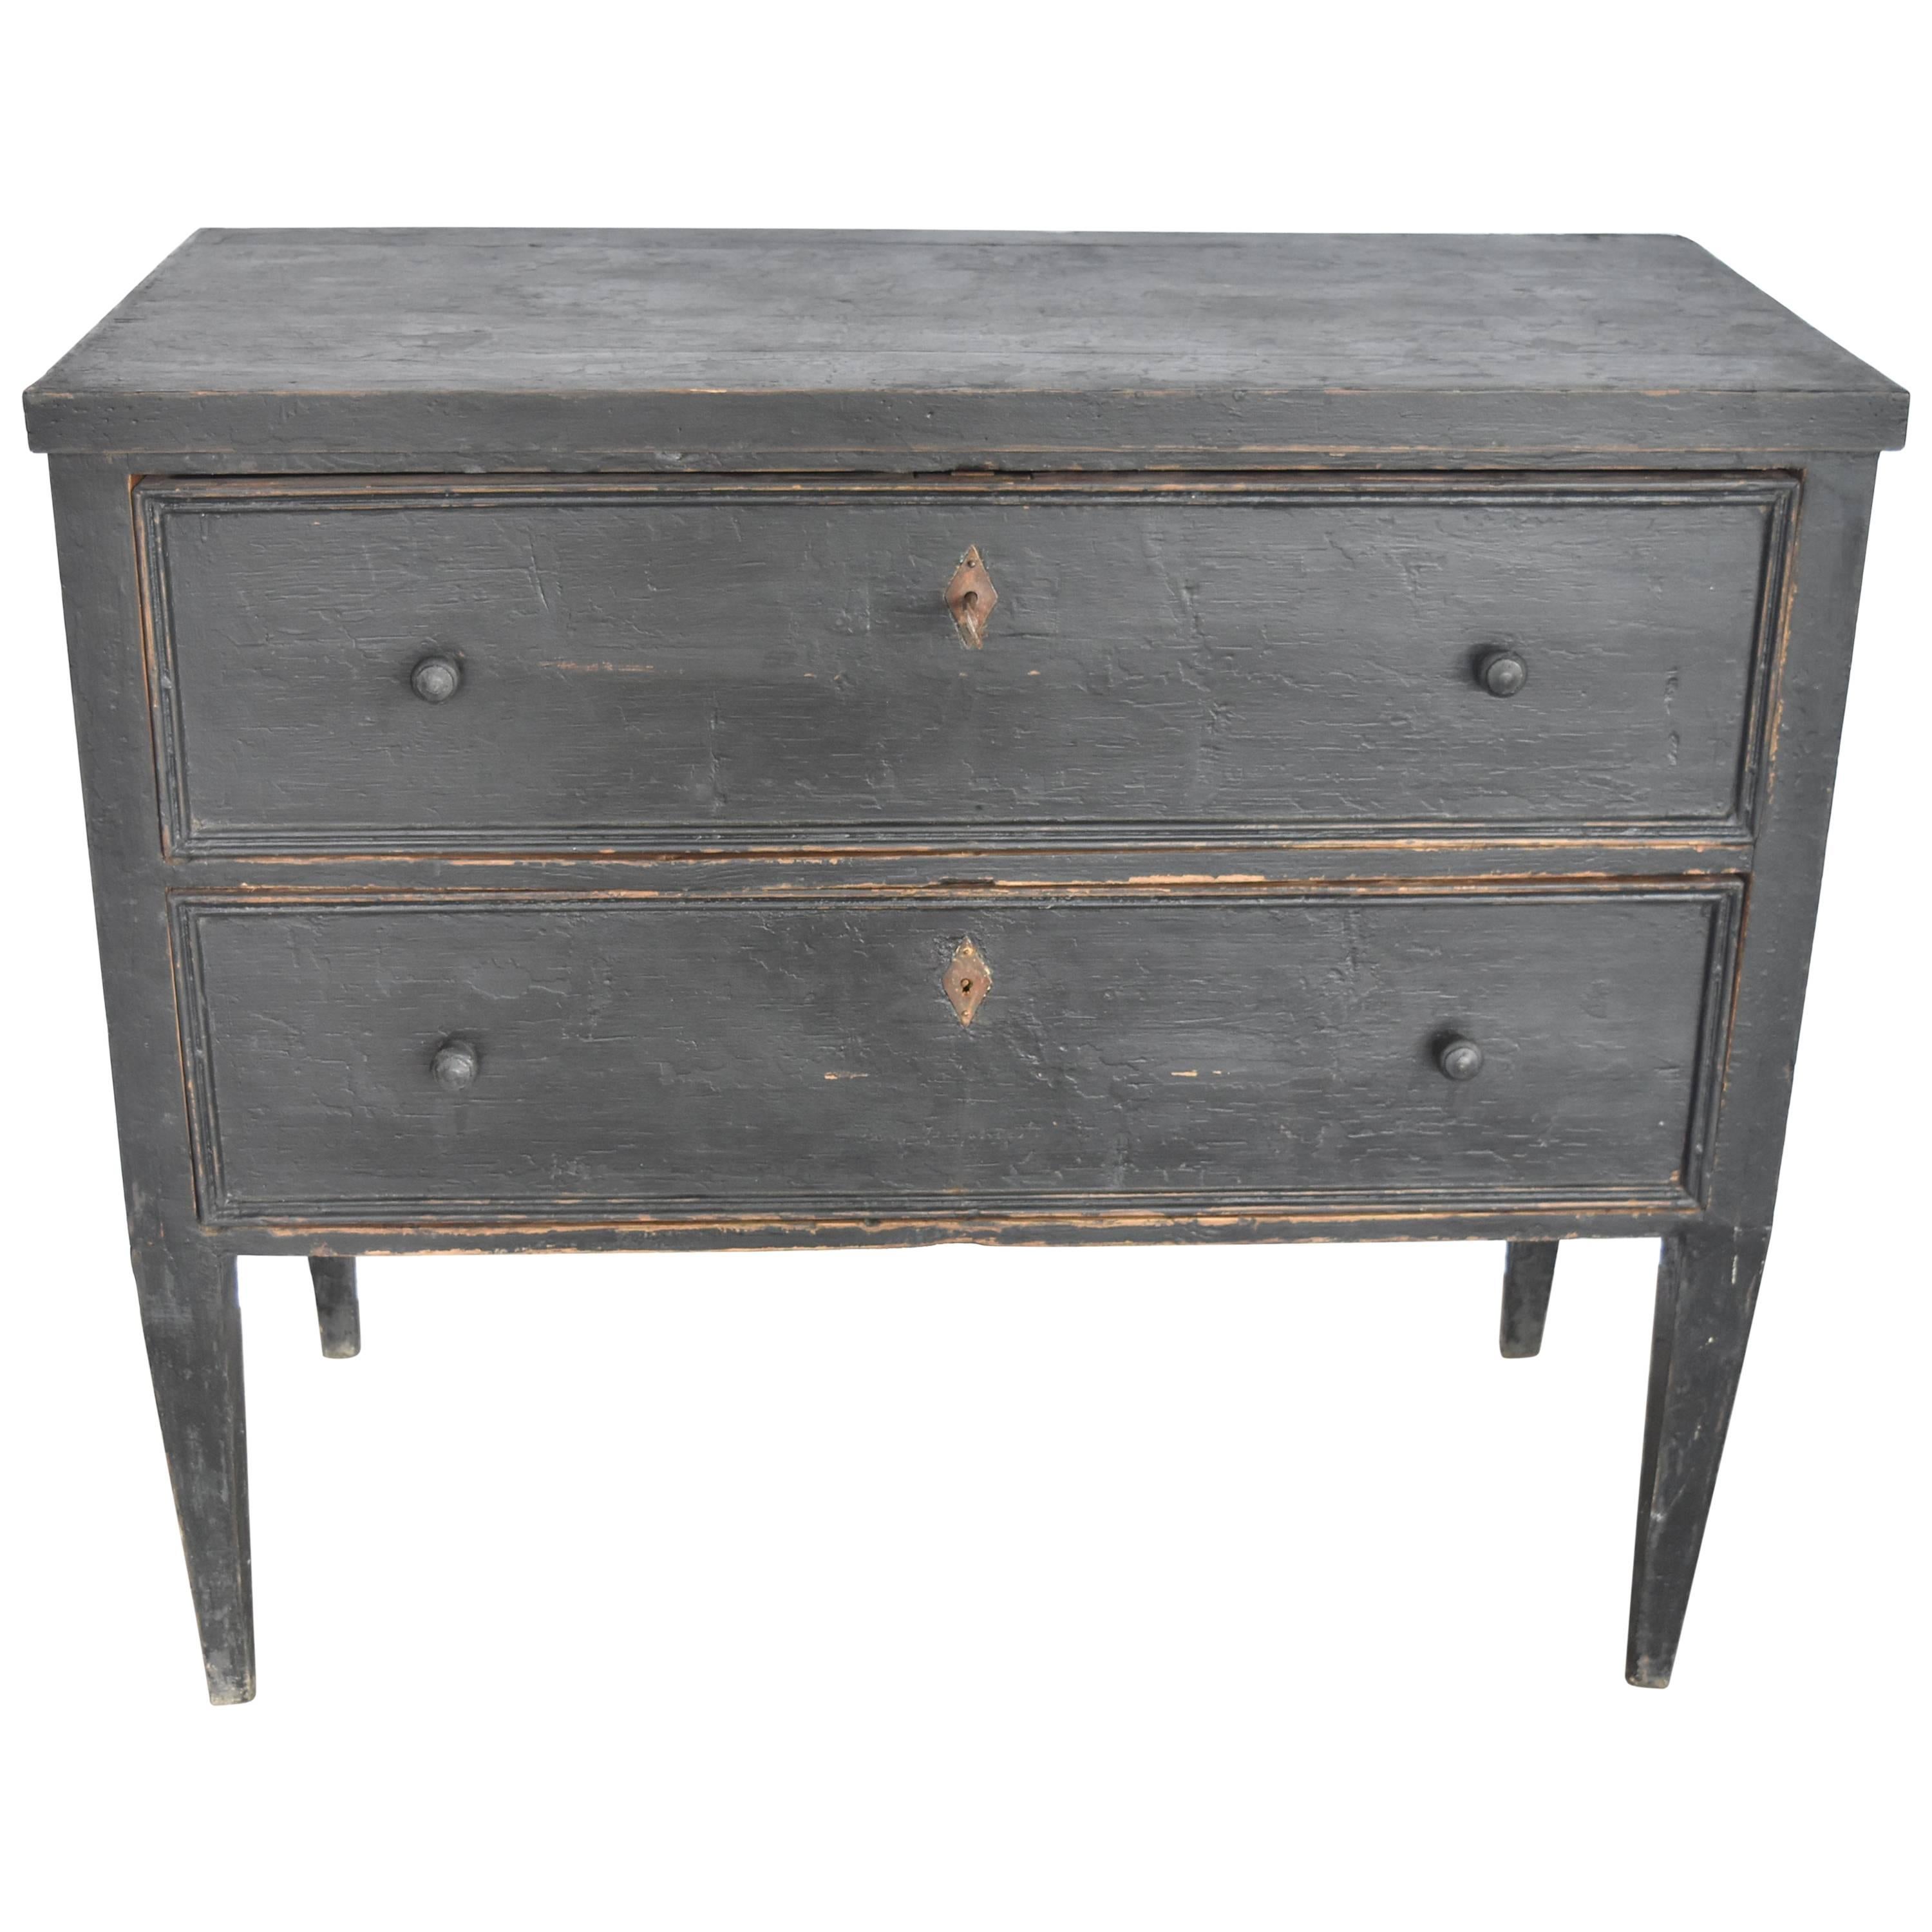 Spanish Two-Drawer Chest Painted Black with Wooden Pulls Made from Pine